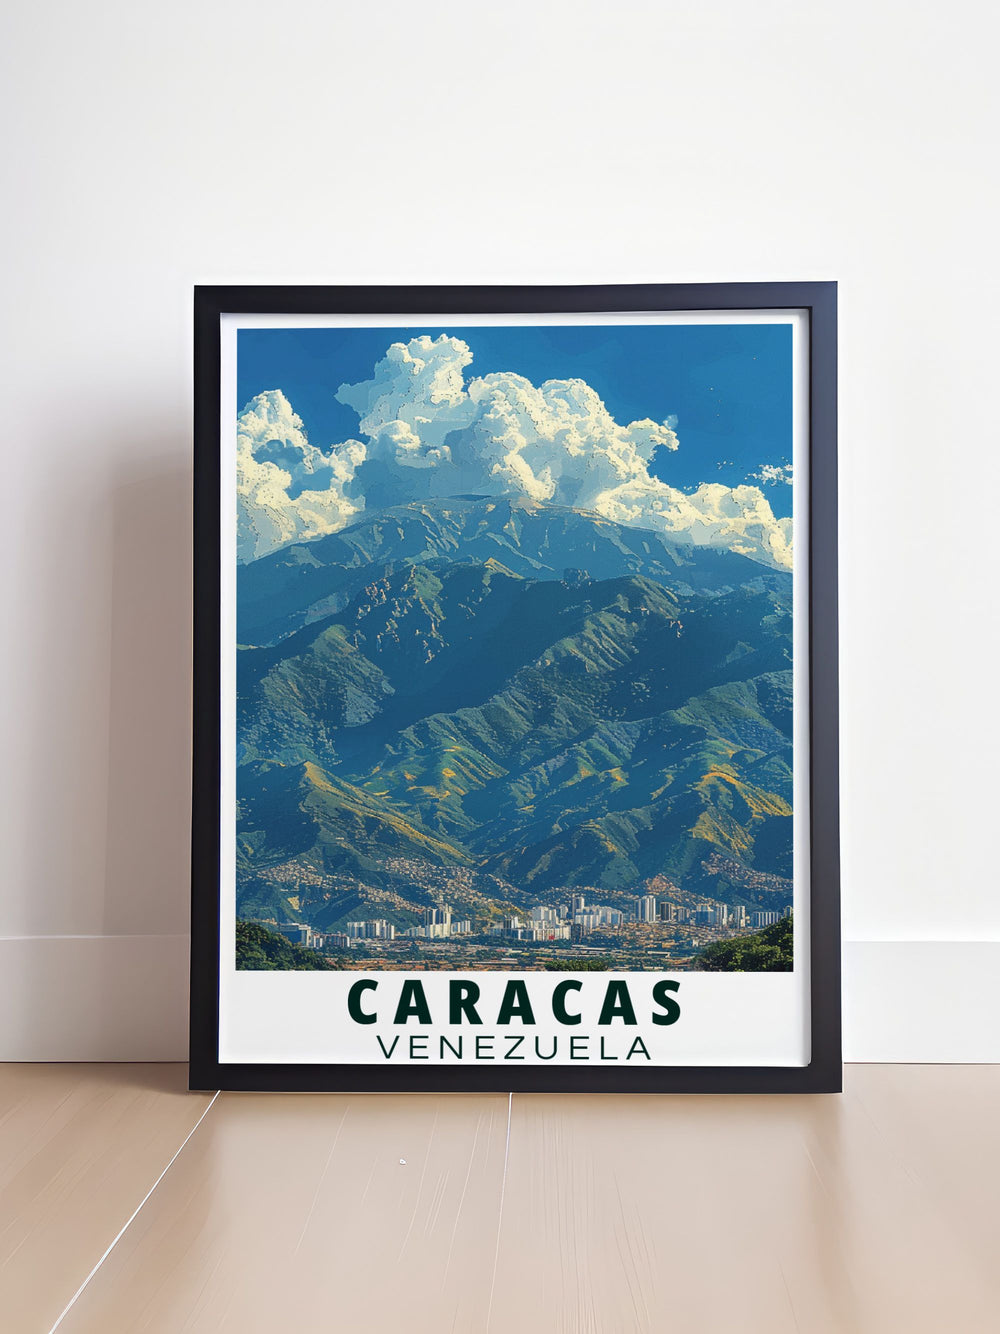 Showcasing Avila Mountains rugged beauty and Caracass cultural vibrancy, this poster is ideal for art lovers who appreciate the diverse and stunning landscapes of Venezuela.